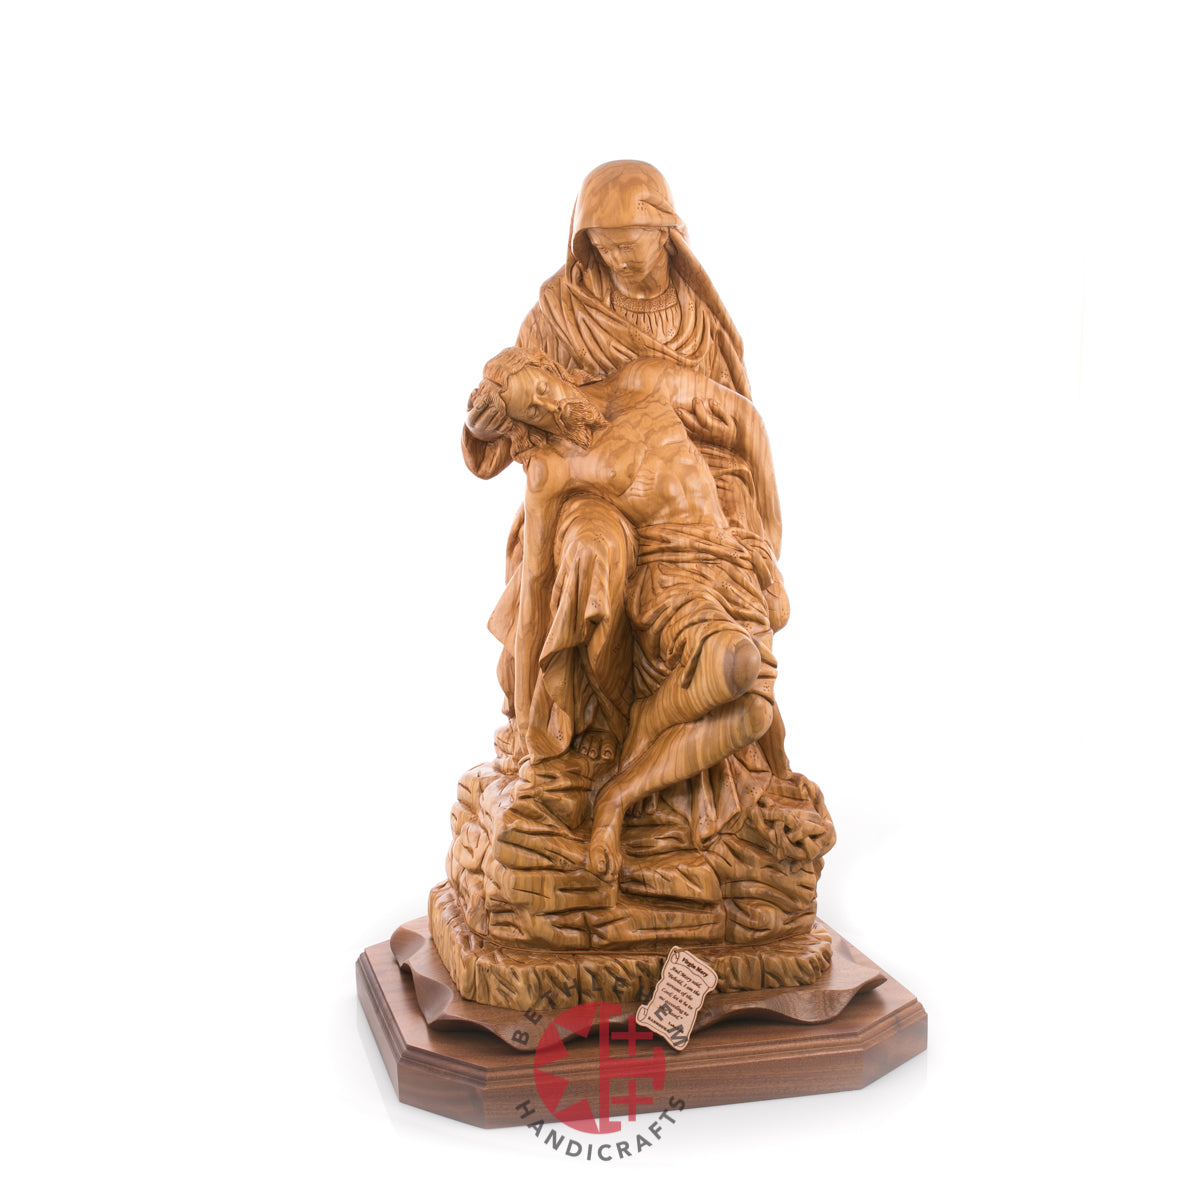 Contemplative Pieta Statue 26.4", Very Large Olive Wood Carving Statue from Bethlehem